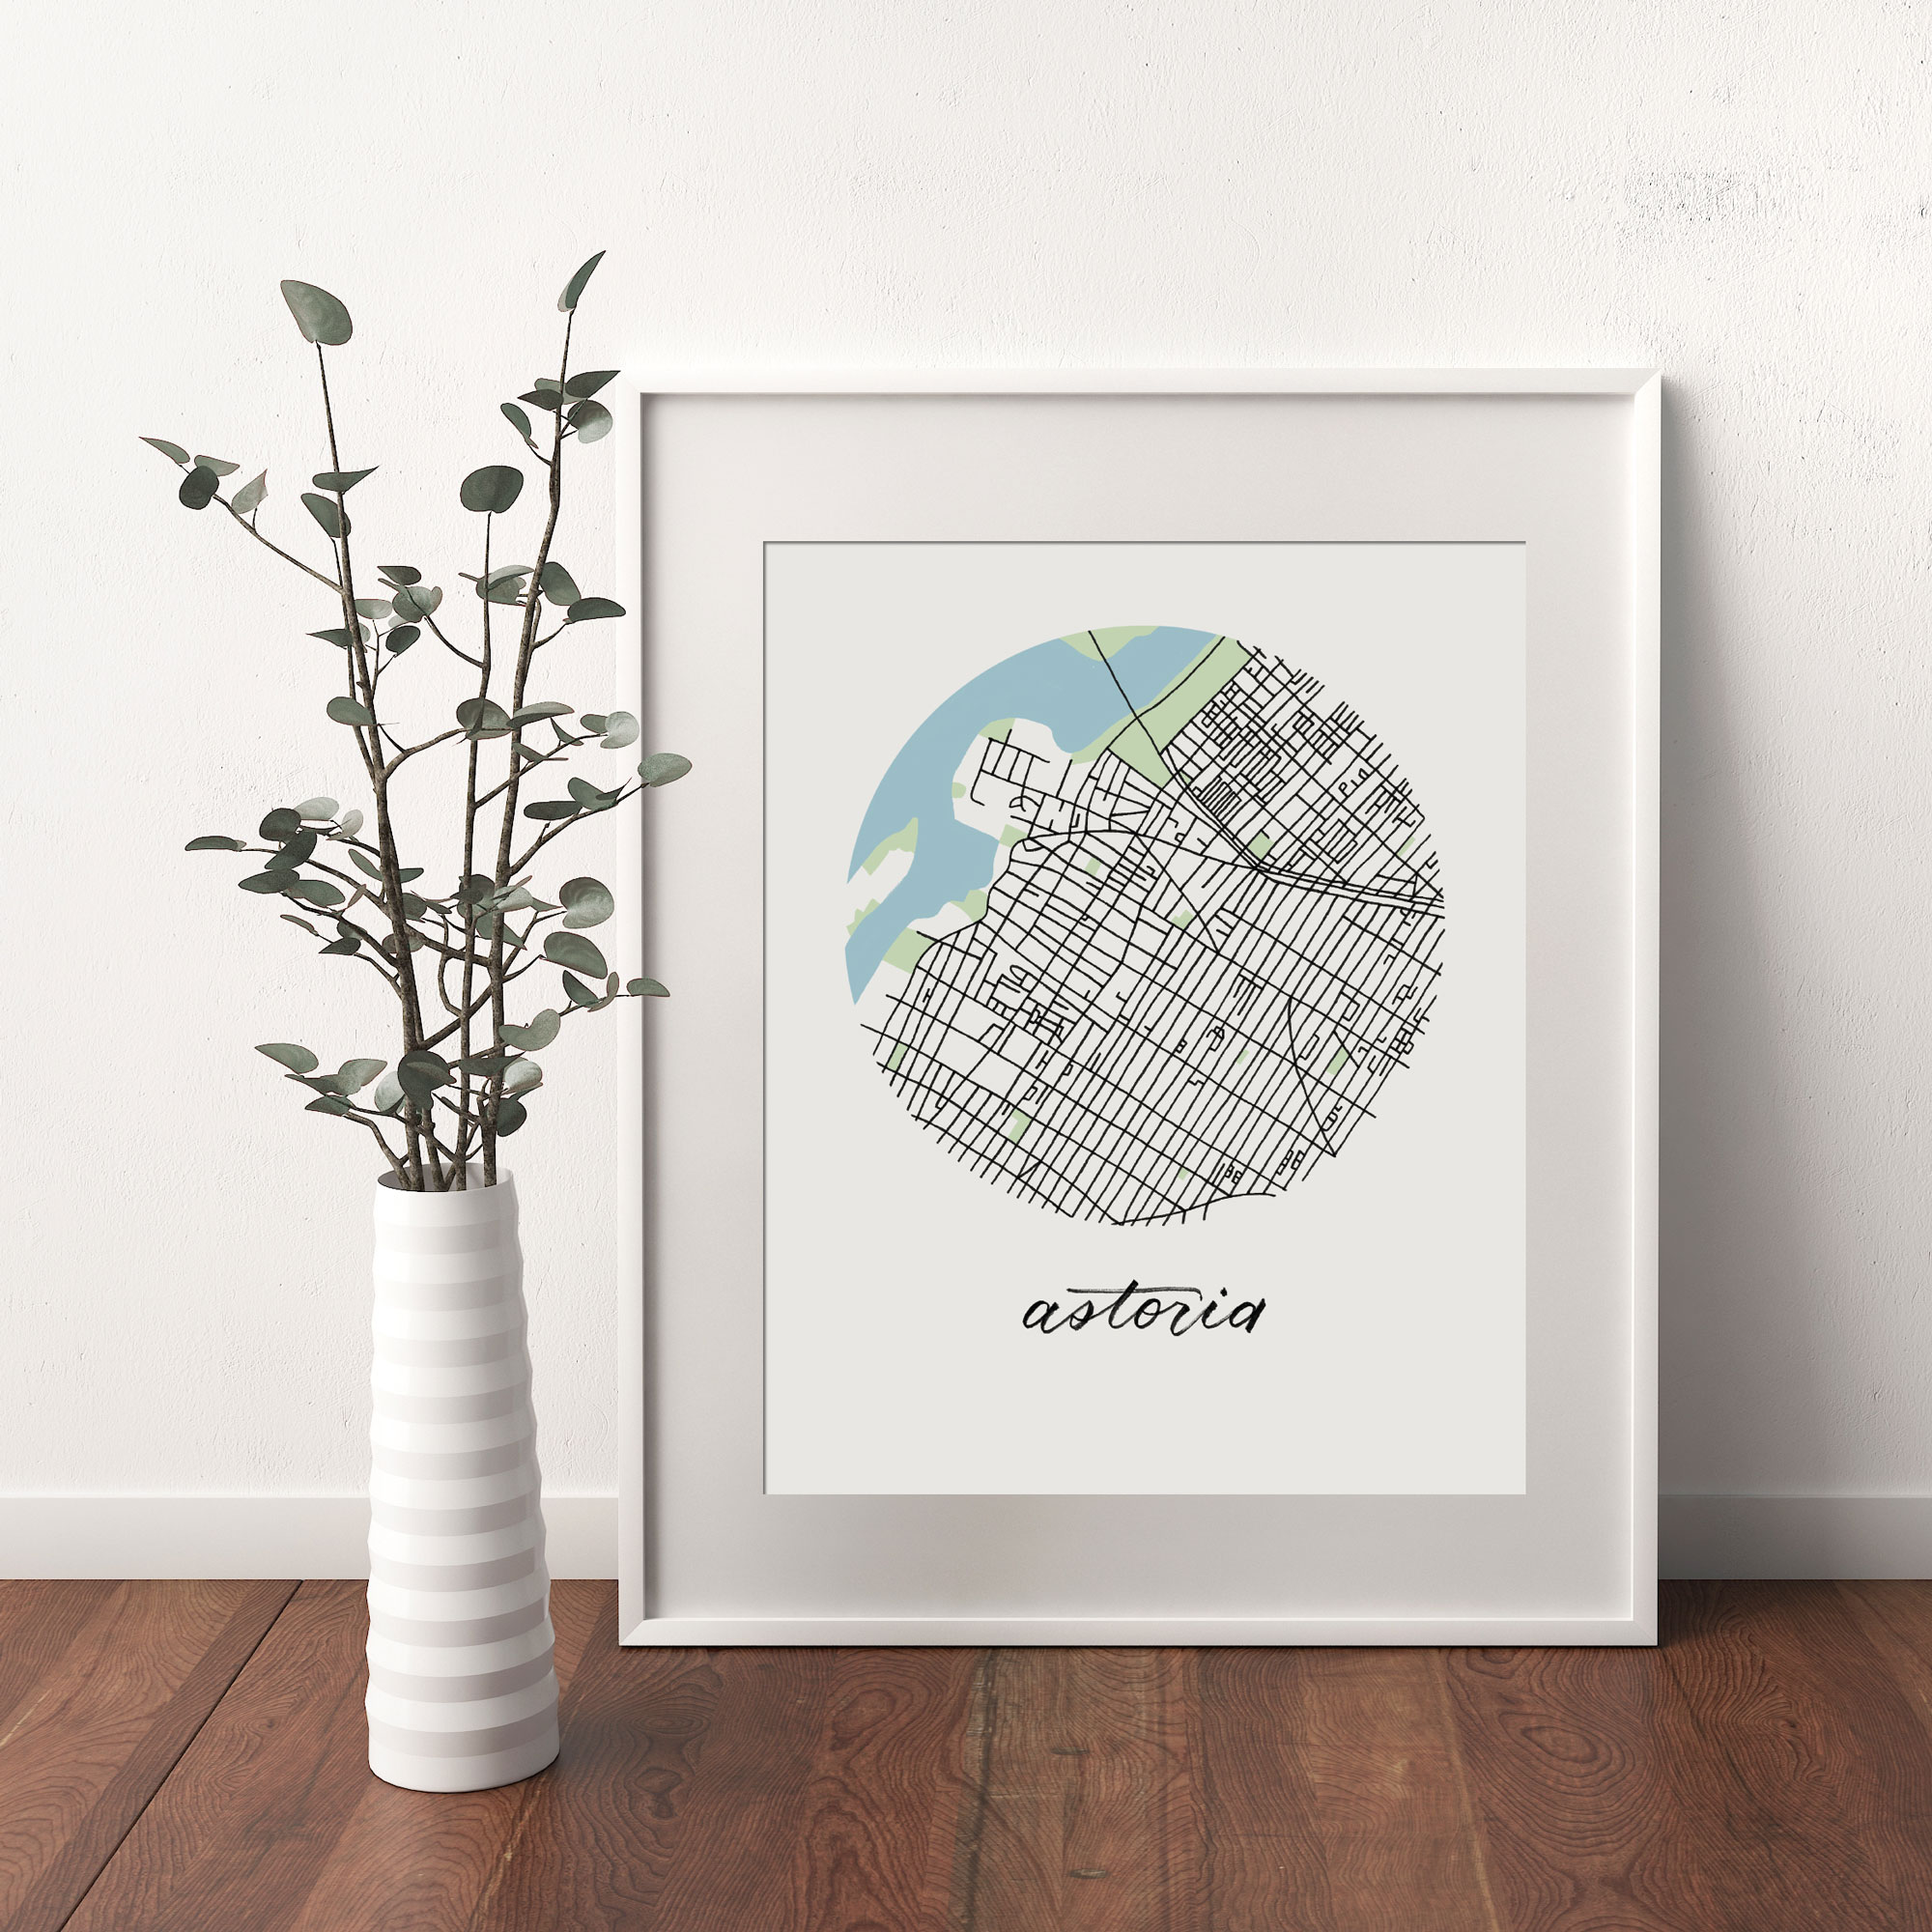 Astoria, Queens Map print framed and leaning on white wall next to dried leaves in a vase